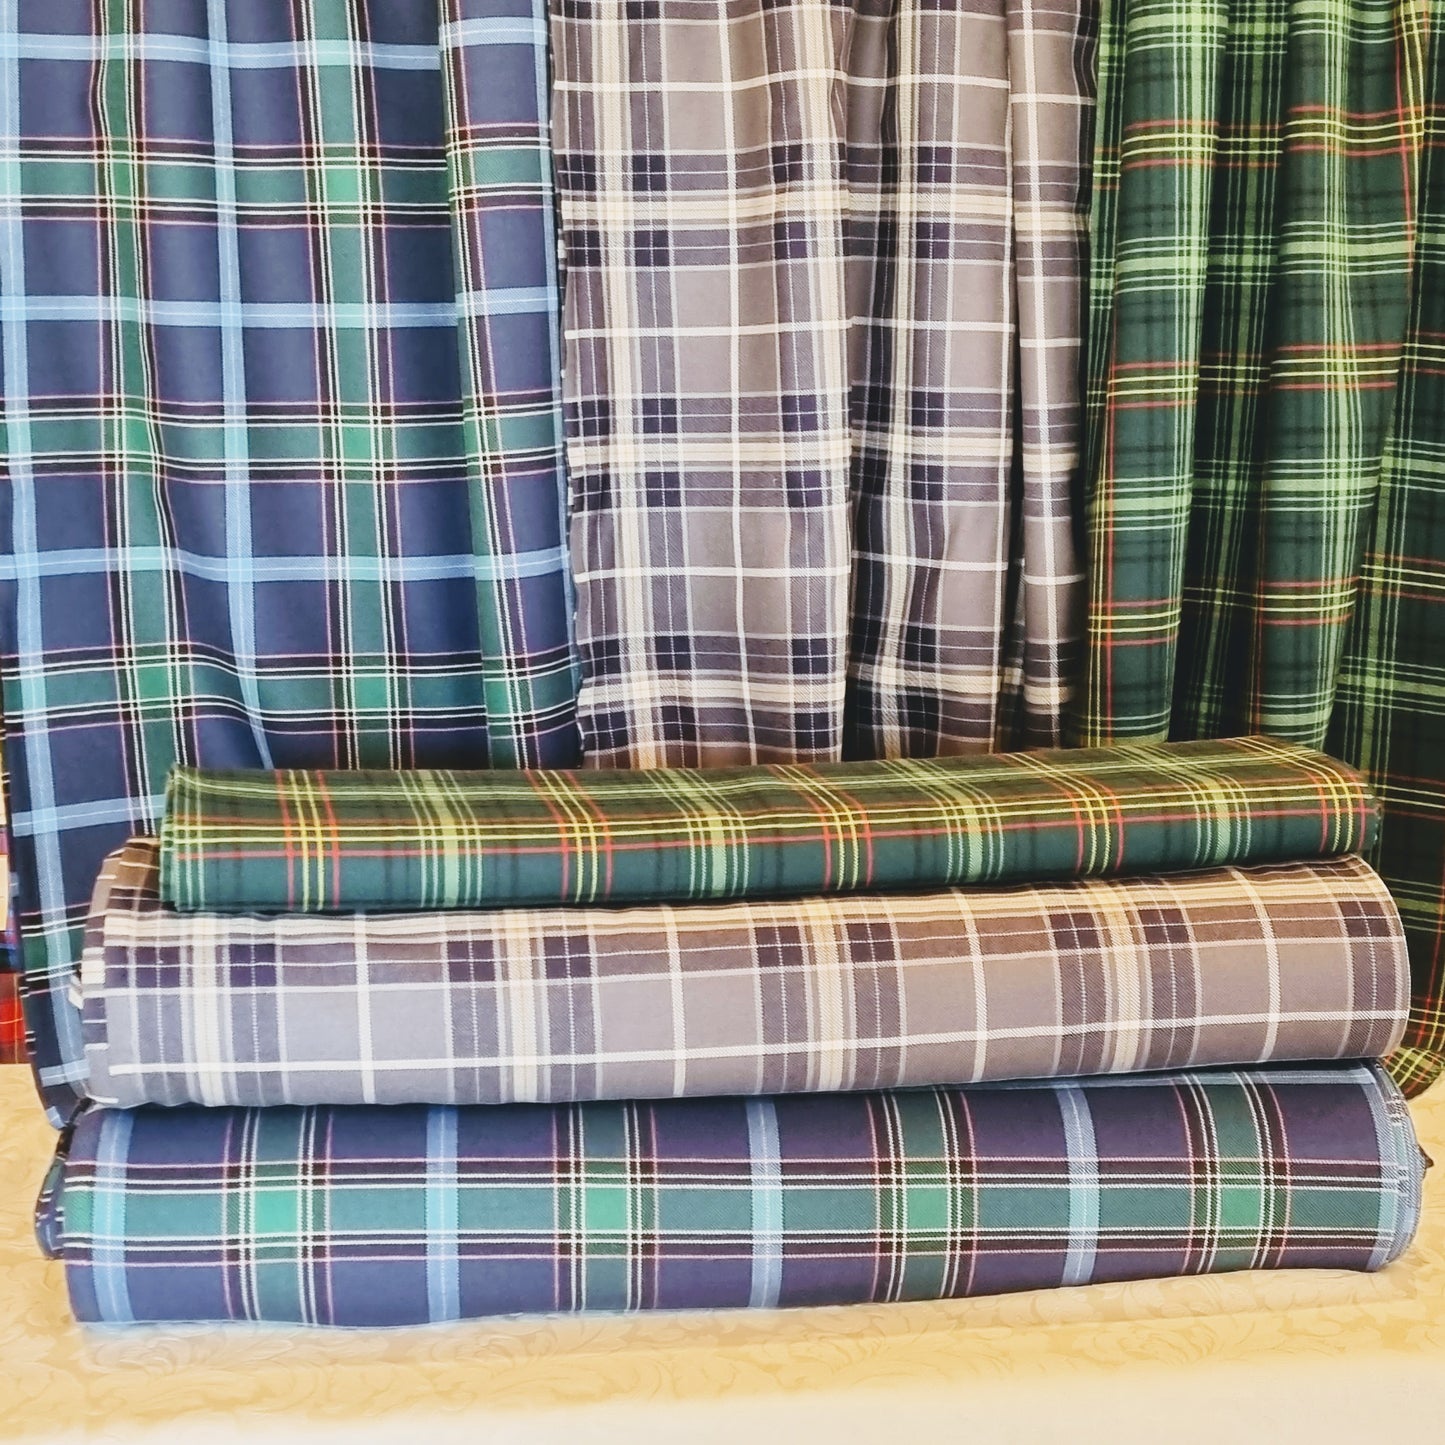 Victoria State, Ballarat District and New South Wales State Tartan Fabric